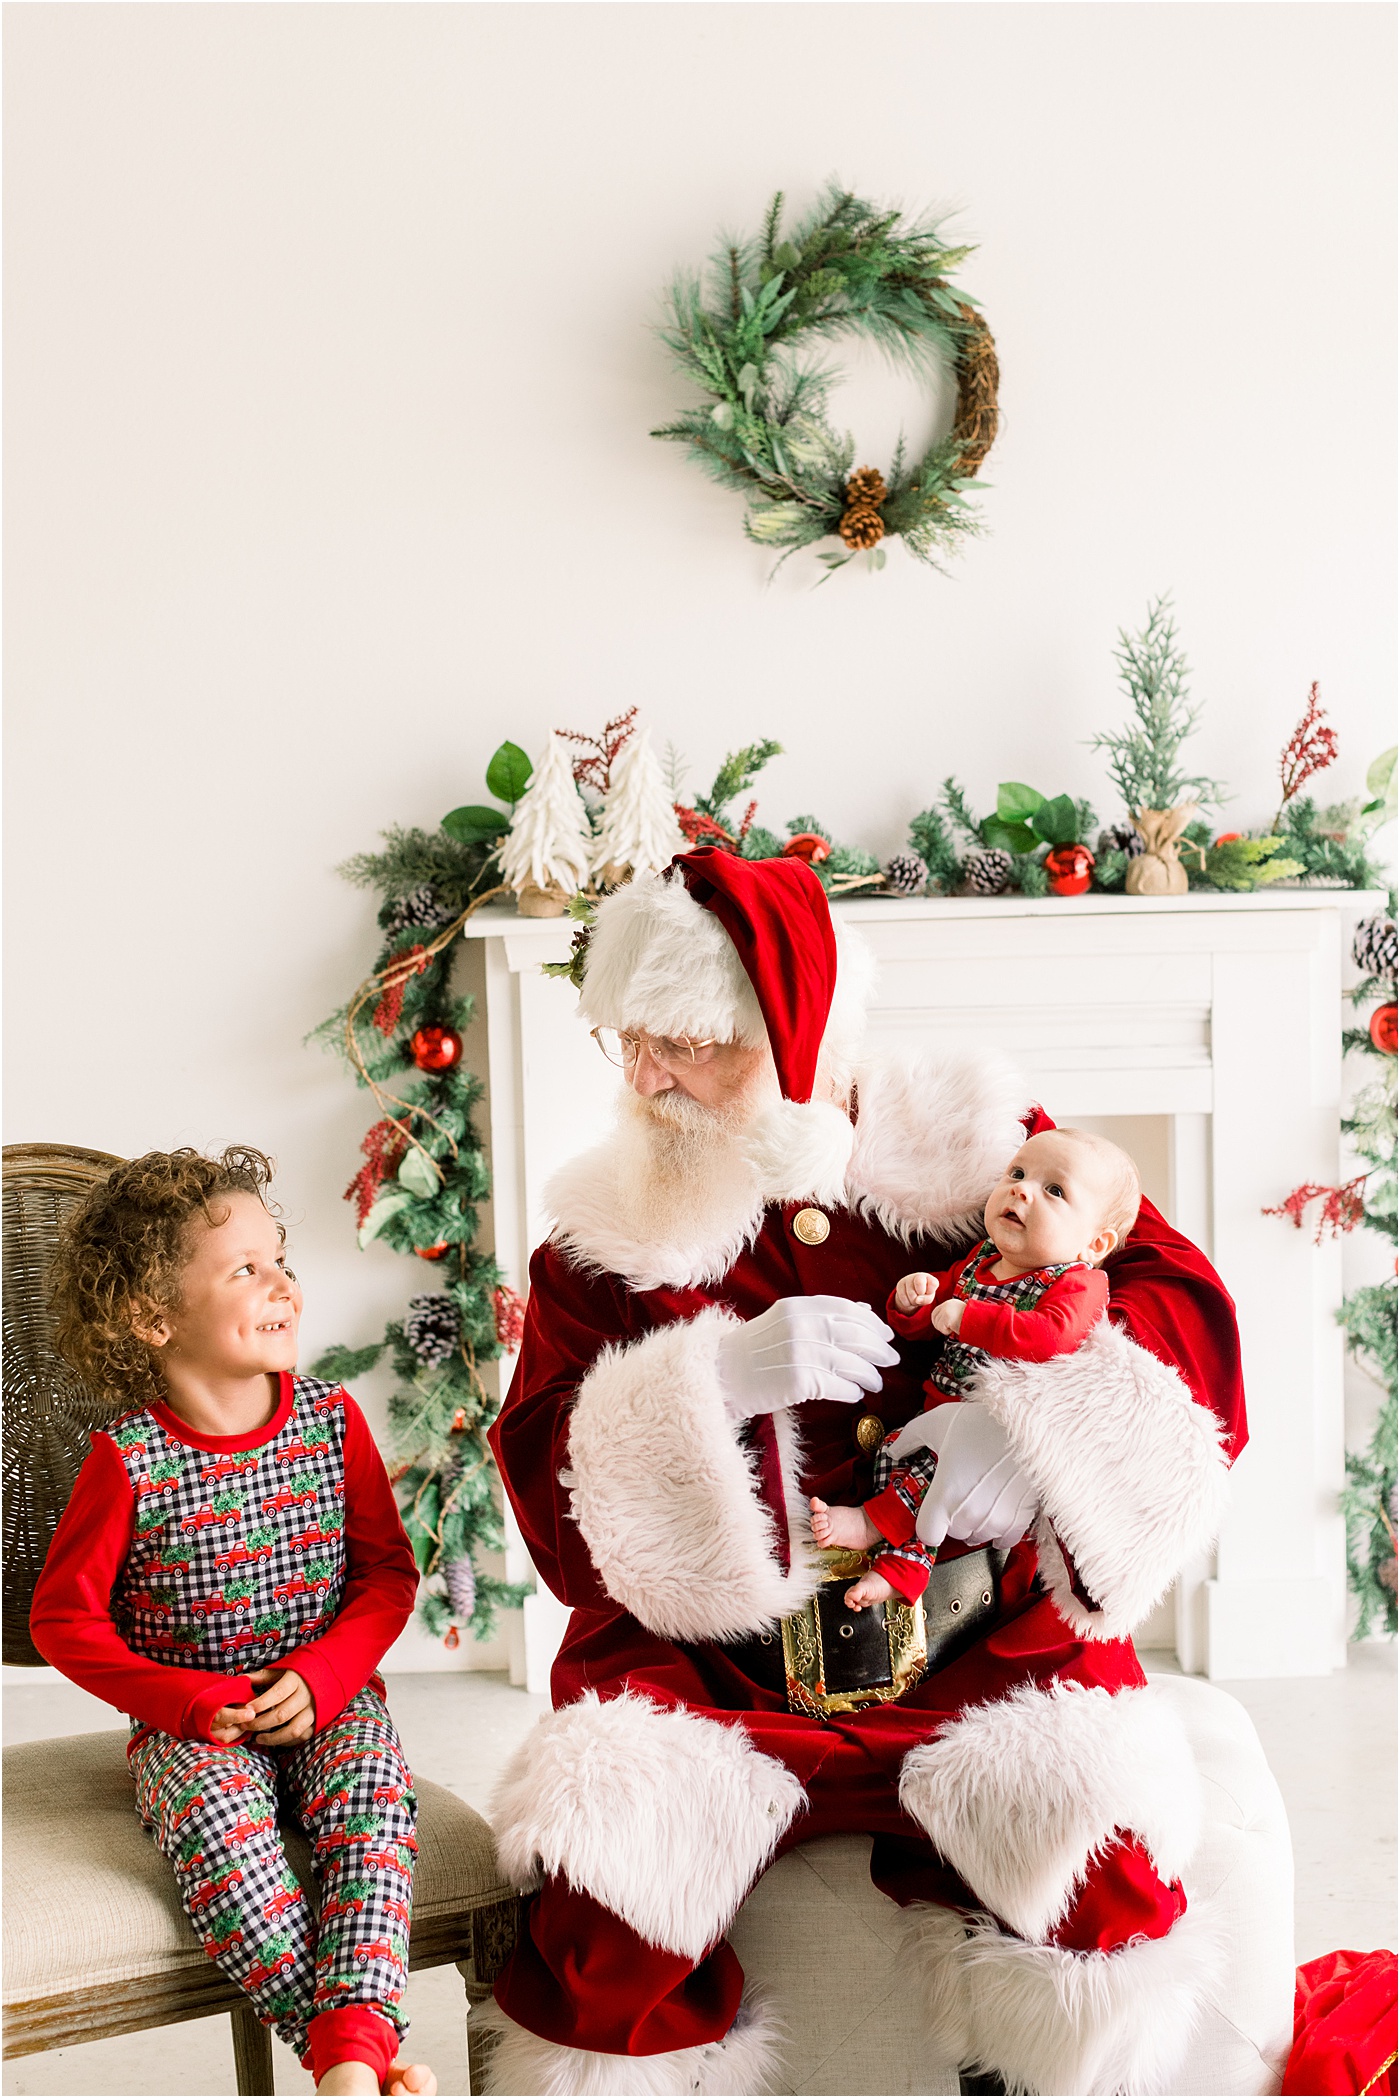 Image of Santa holding baby while talking with toddler next to him. Photo by Sana Ahmed Photography.